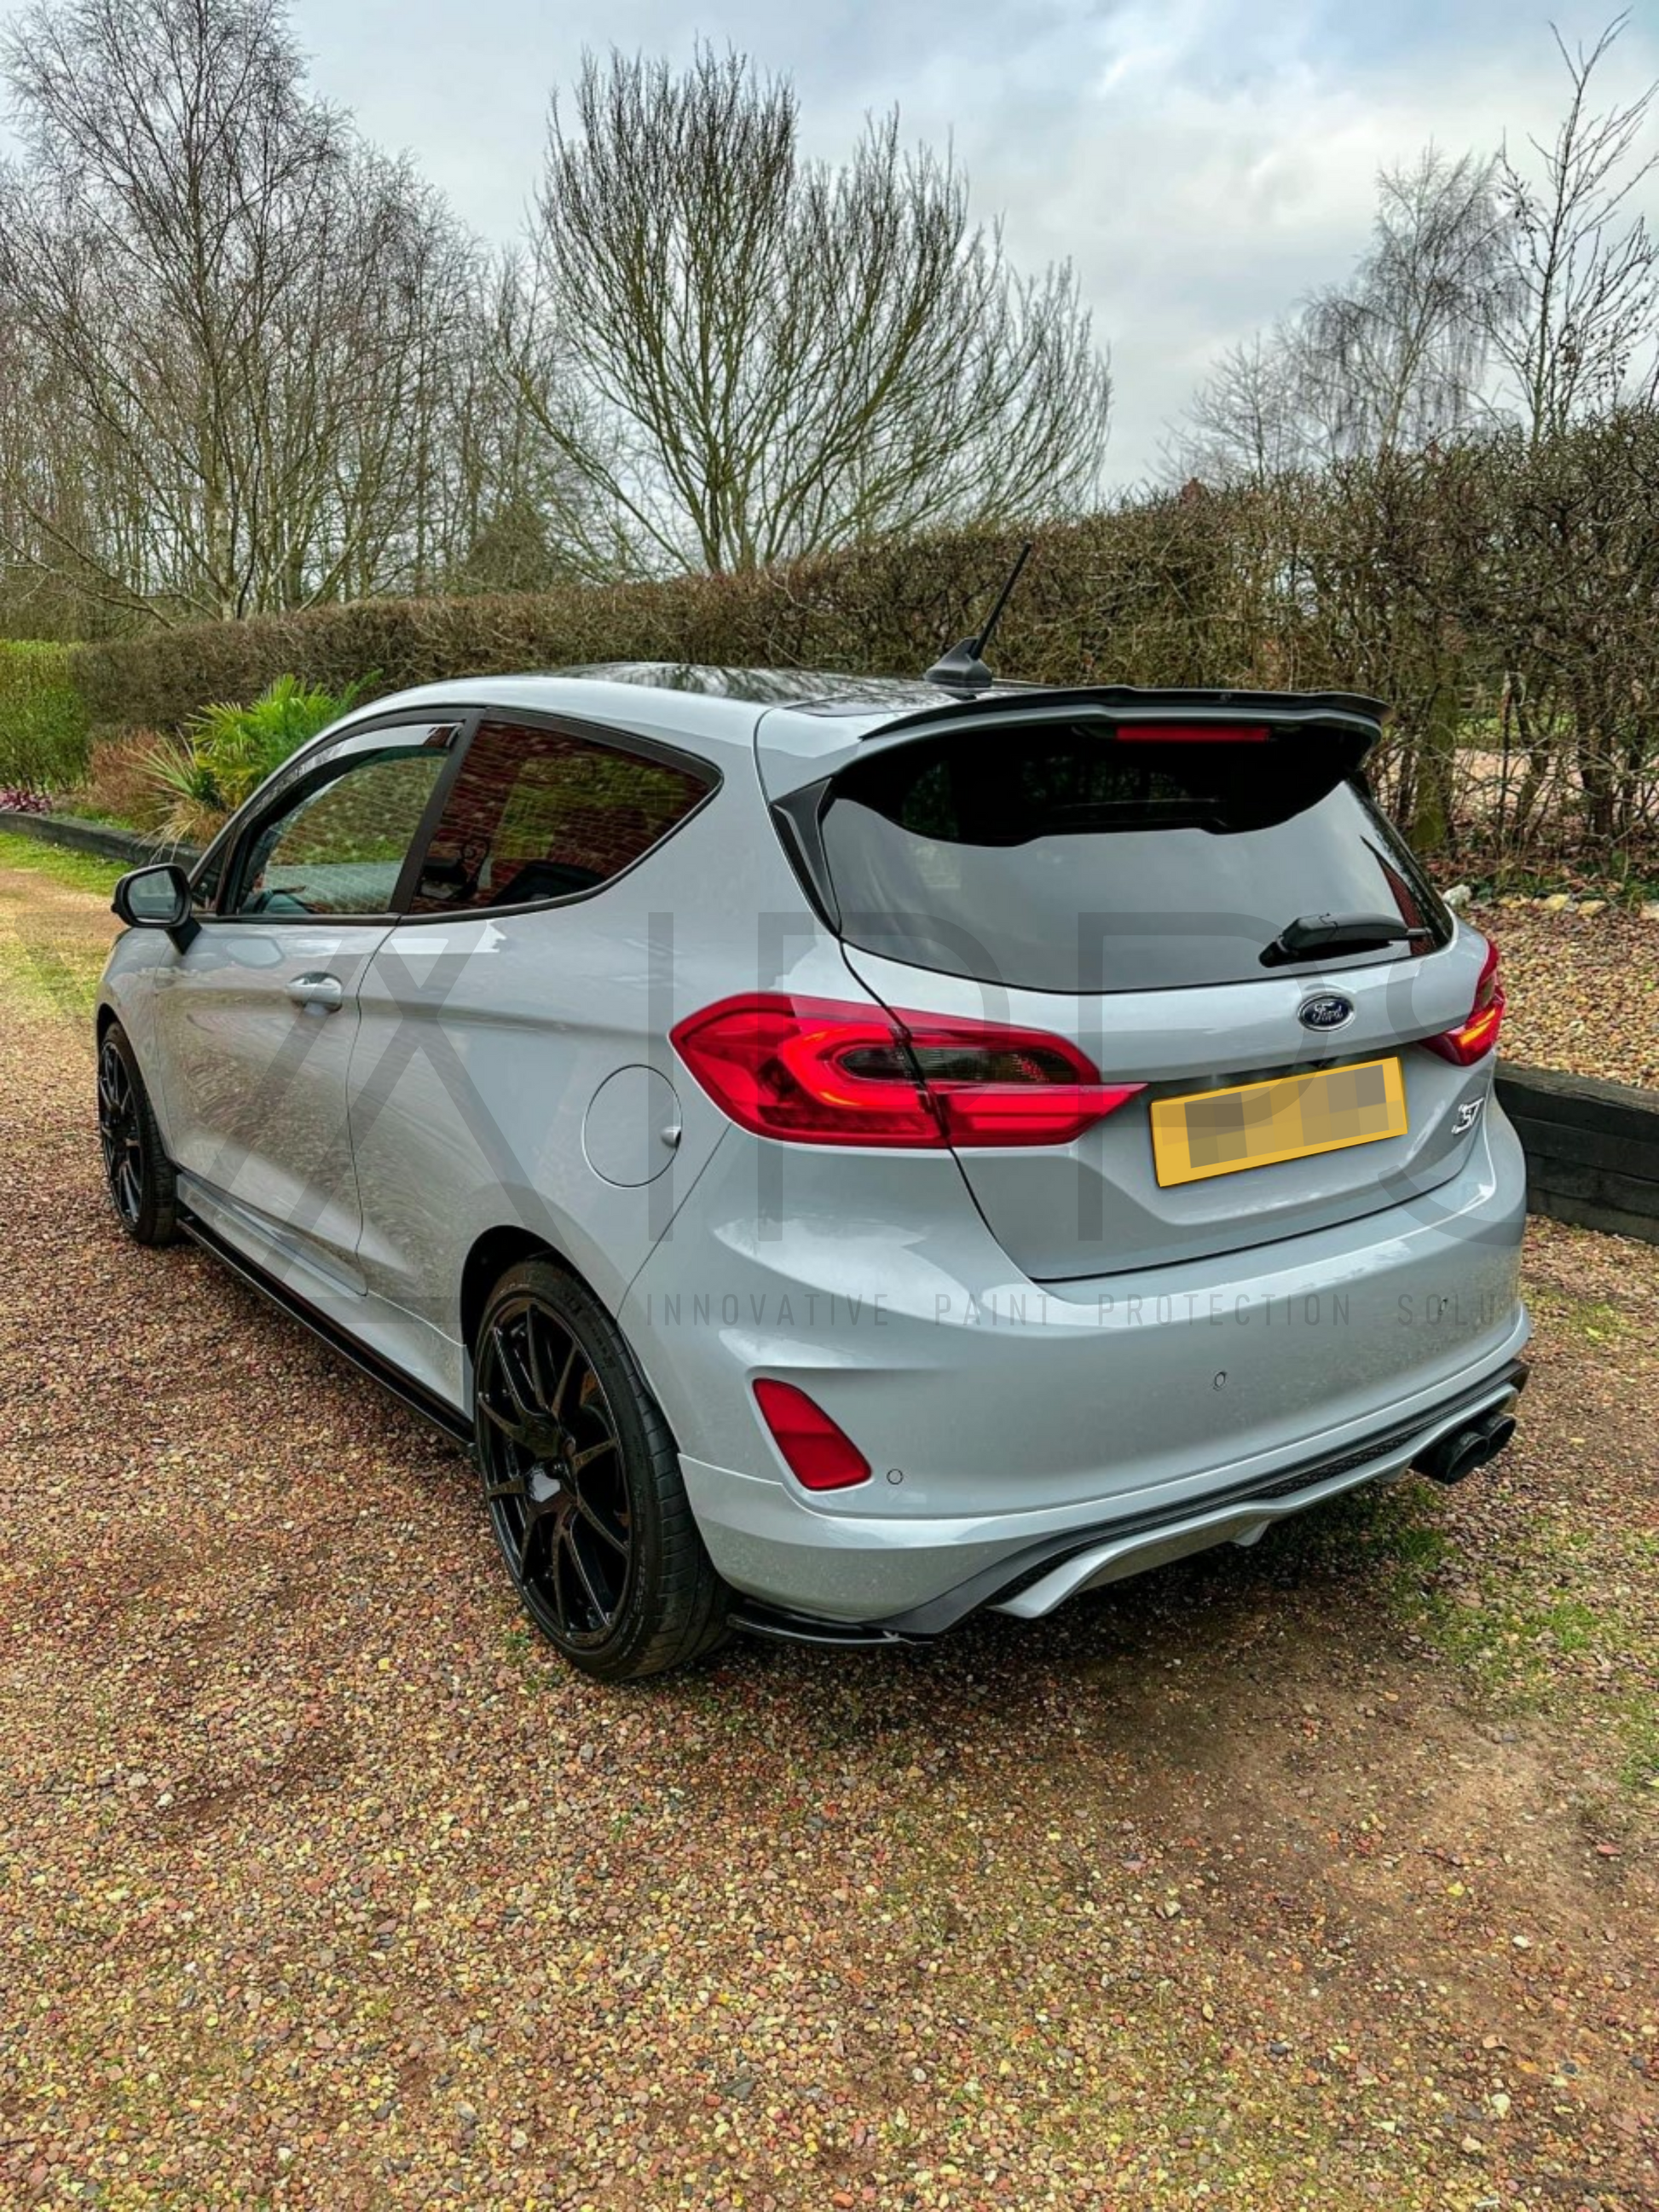 Ford Fiesta Rear Reverse Light Tint Overlays (MK8  MK8.5) – Innovative  Paint Protection Solutions